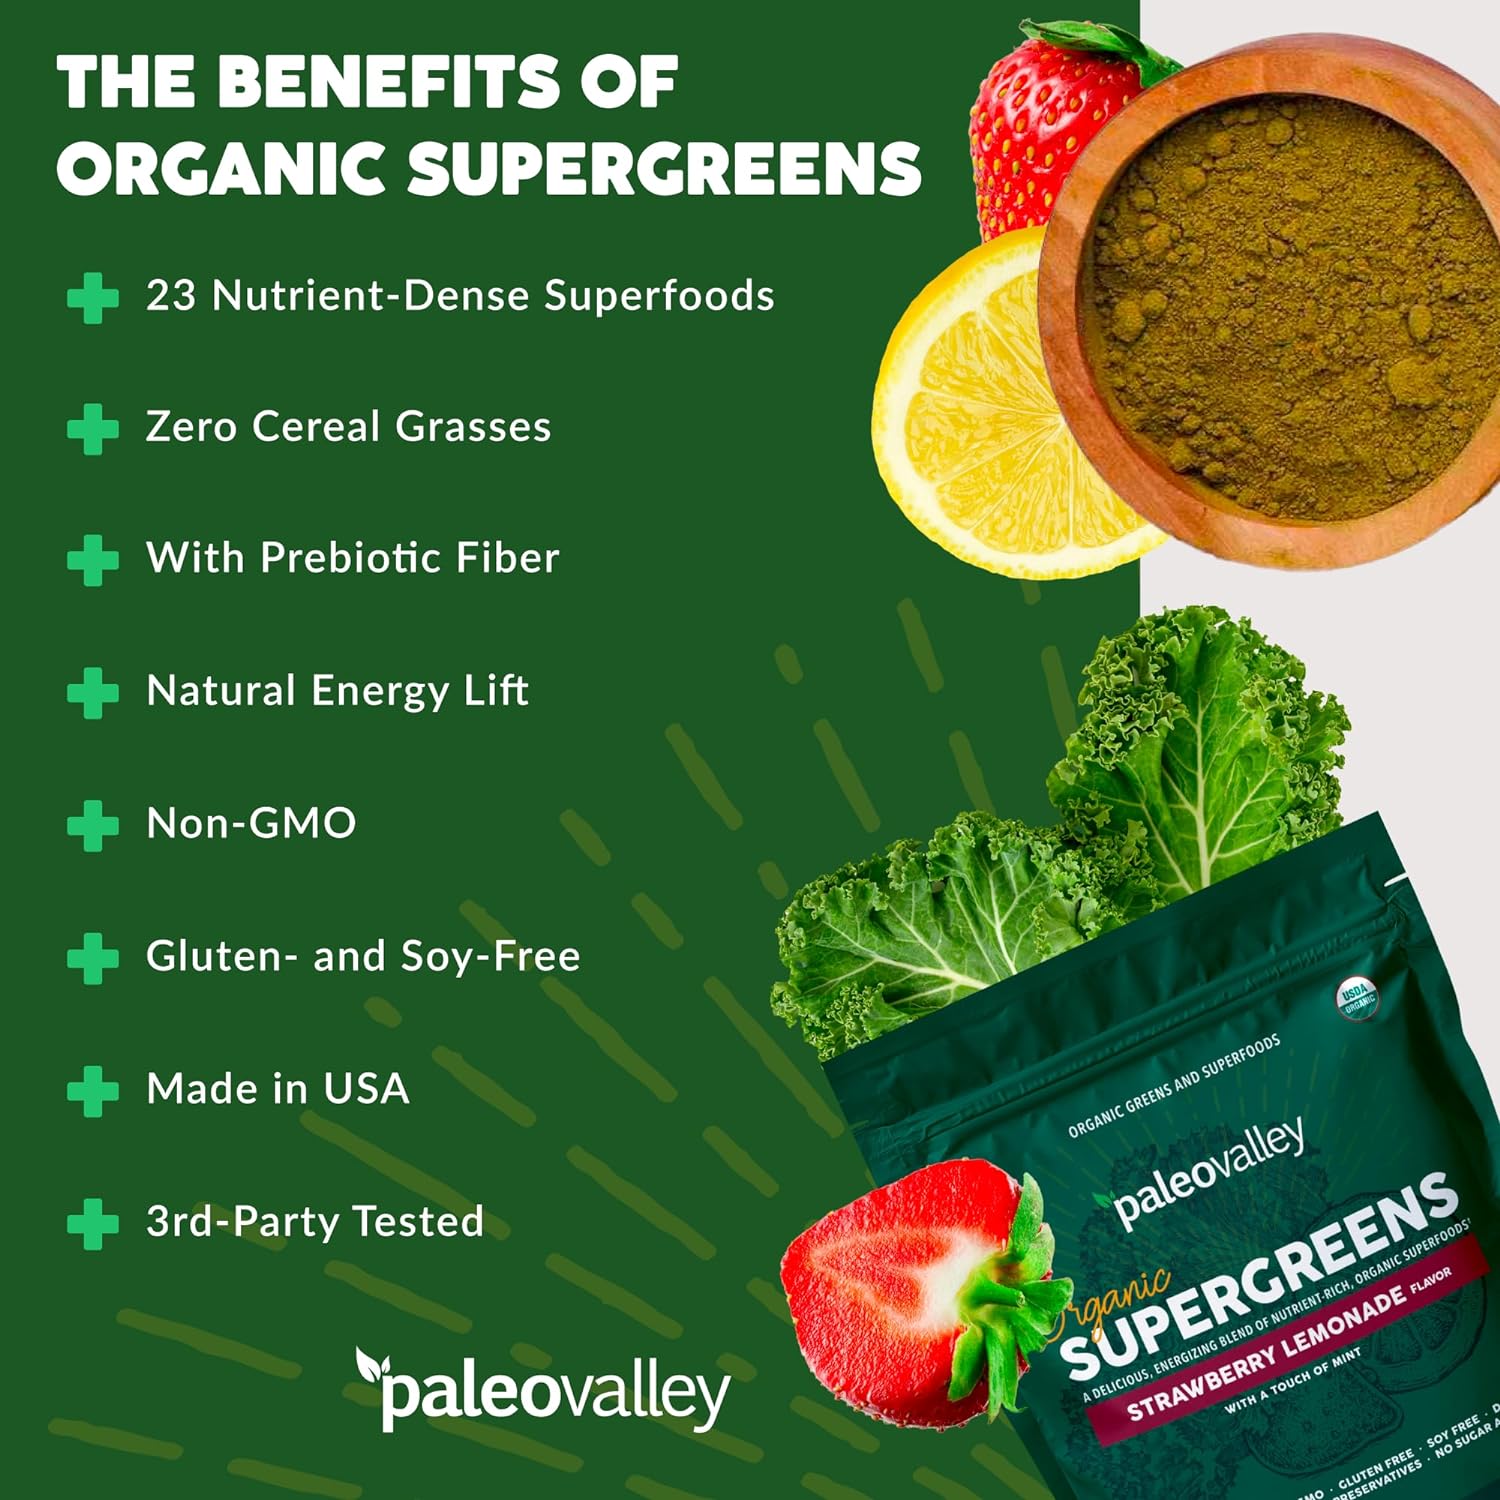 Paleovalley Organic Supergreens - Organic Greens Powder Superfood for Immune Support - Paleo Green Powder Blend - 28 Servings - 23 Organic Superfoods - Gluten Free, No Cereal Grasses, Soy or Grain